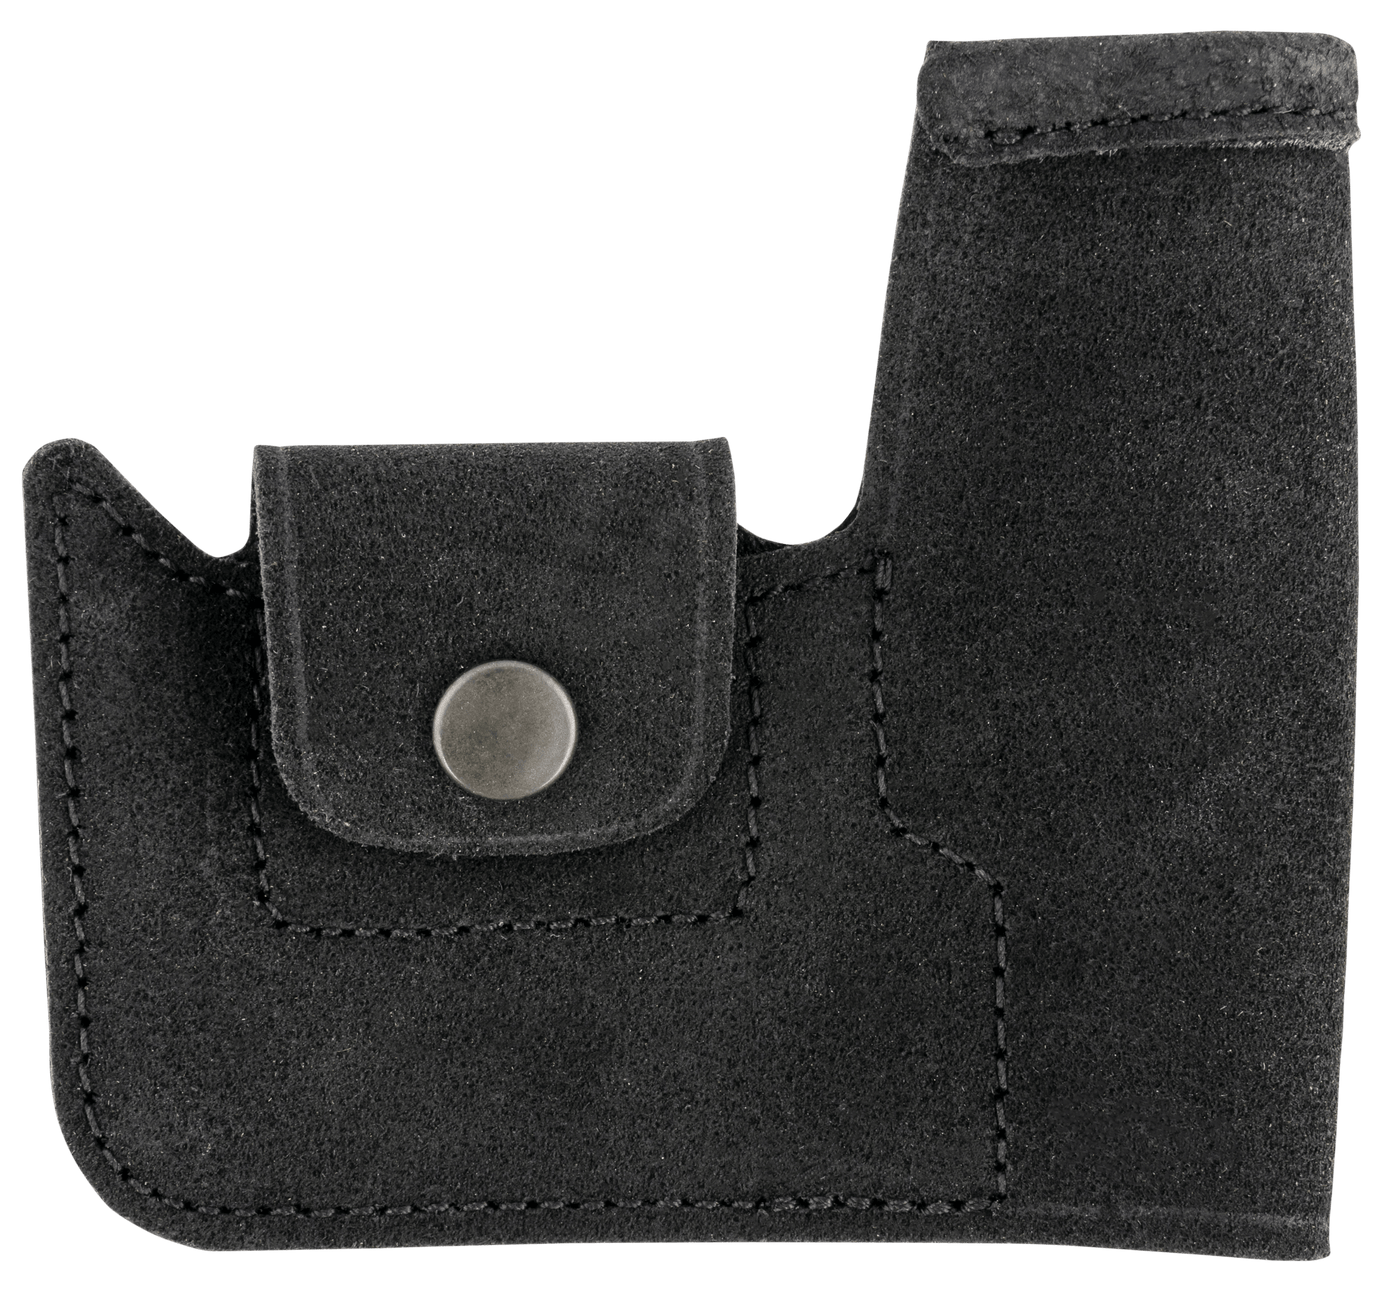 Galco Galco Pocket Protector Holster - Rh Leather Ruger Lcp Ii Black Holsters And Related Items